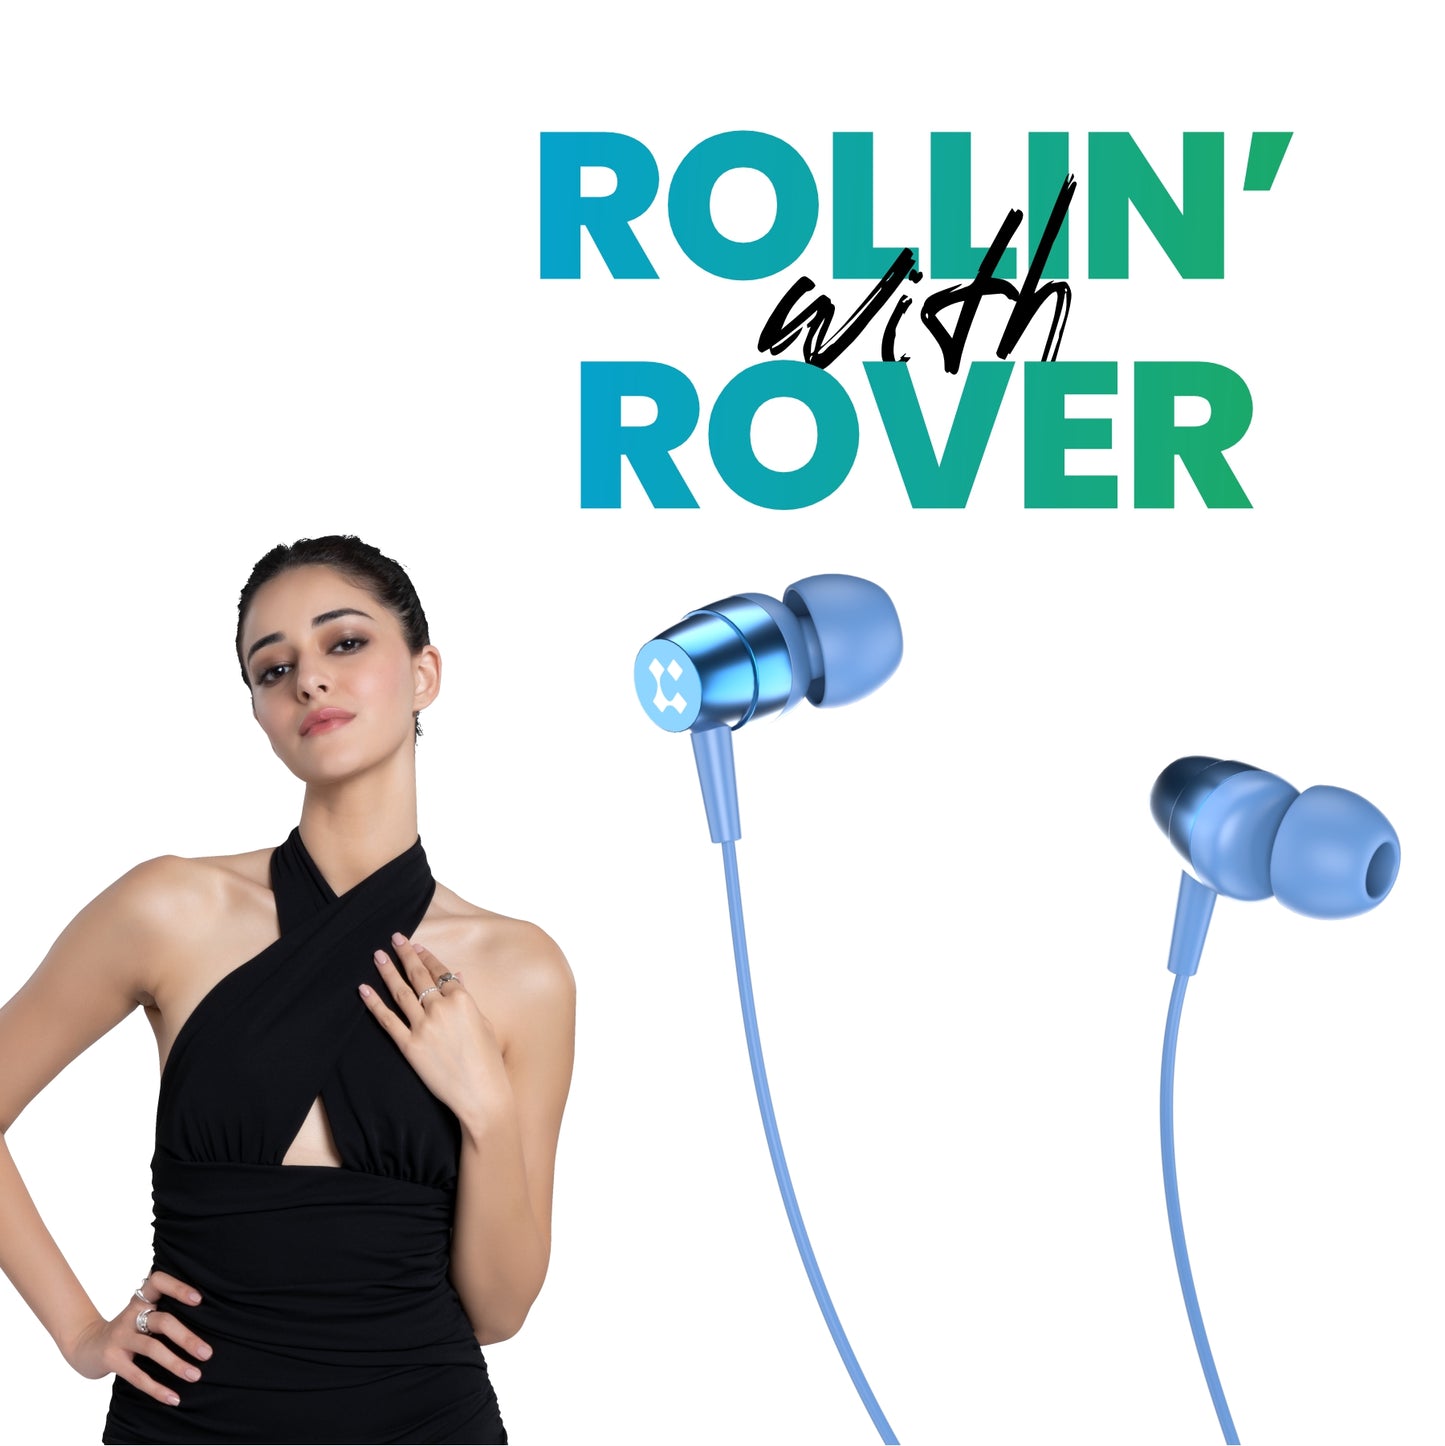 LYNE Rover 9 50 Hours Music Time Bluetooth Neckband with 40 MS Low Latency for Gaming Mode